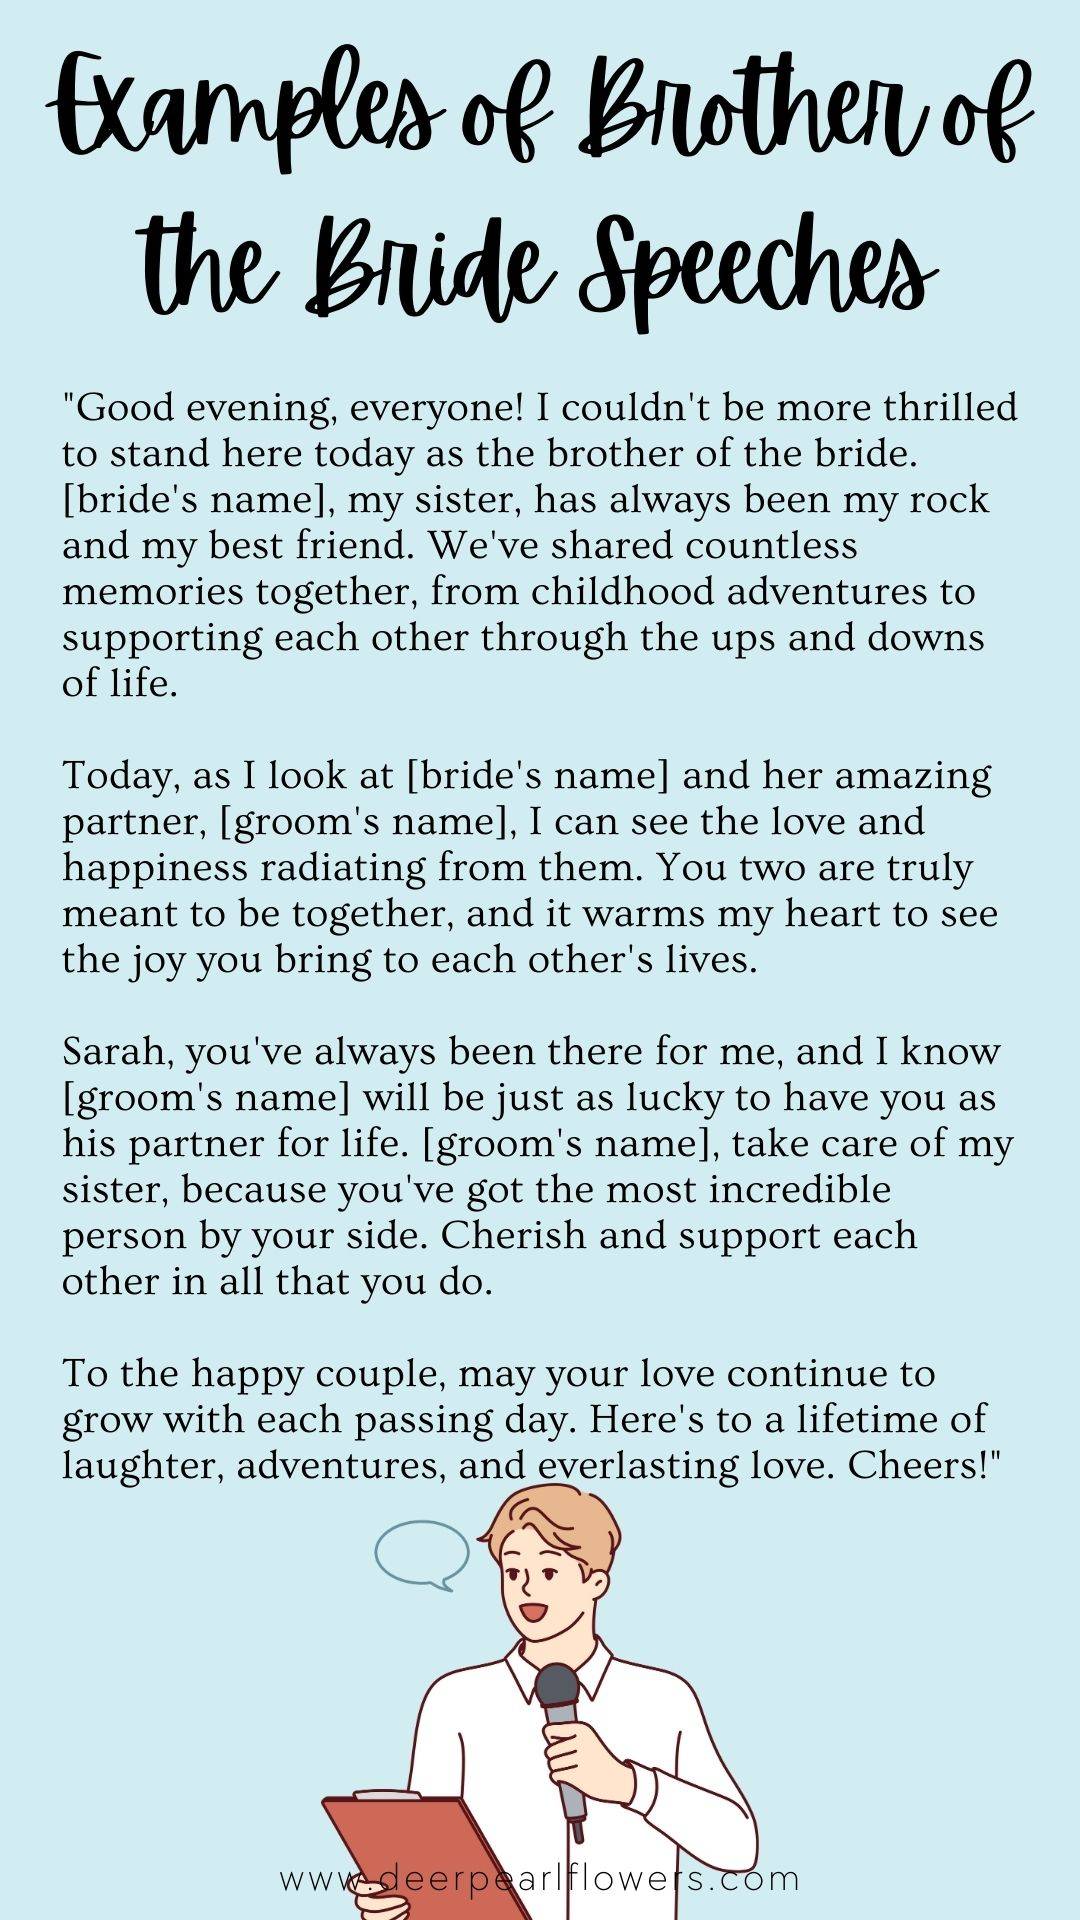 Brother of the Bride Speech Example